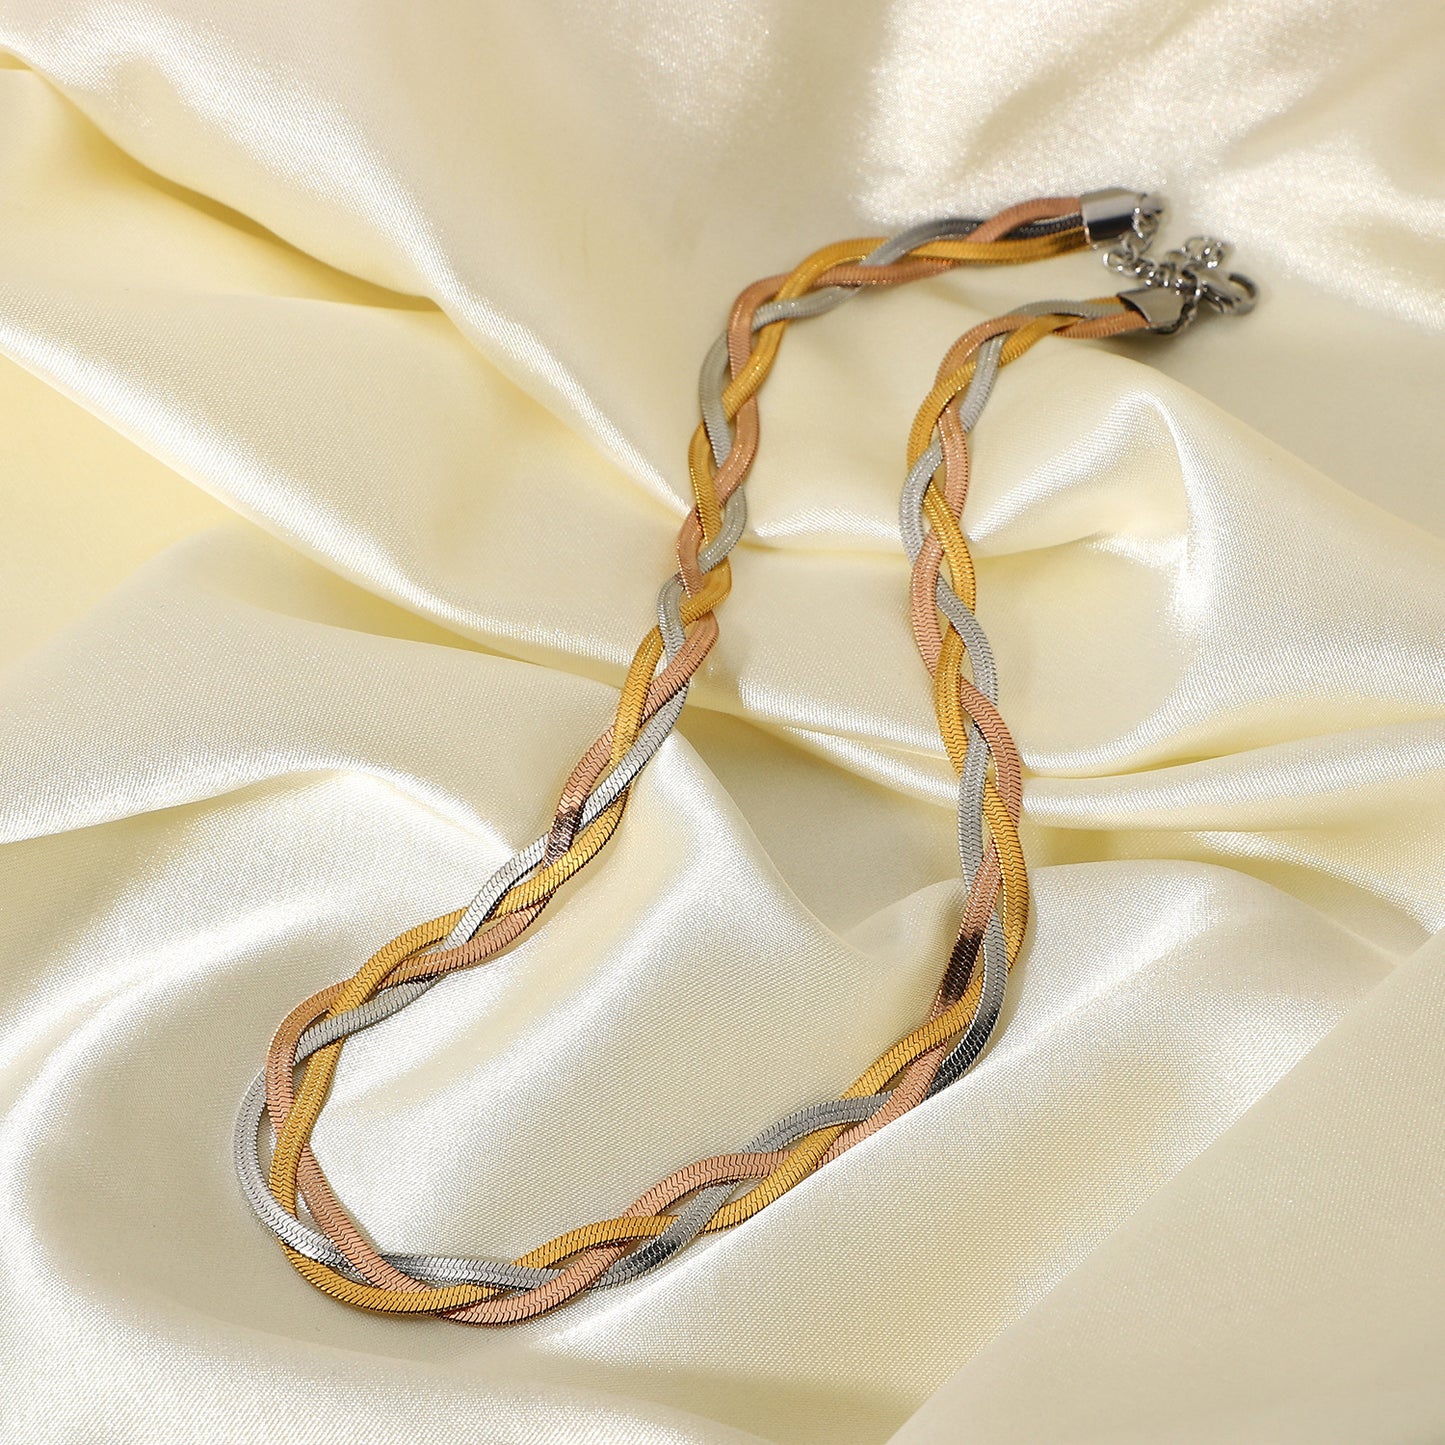 N40.Three Strand Snake Chain Necklace